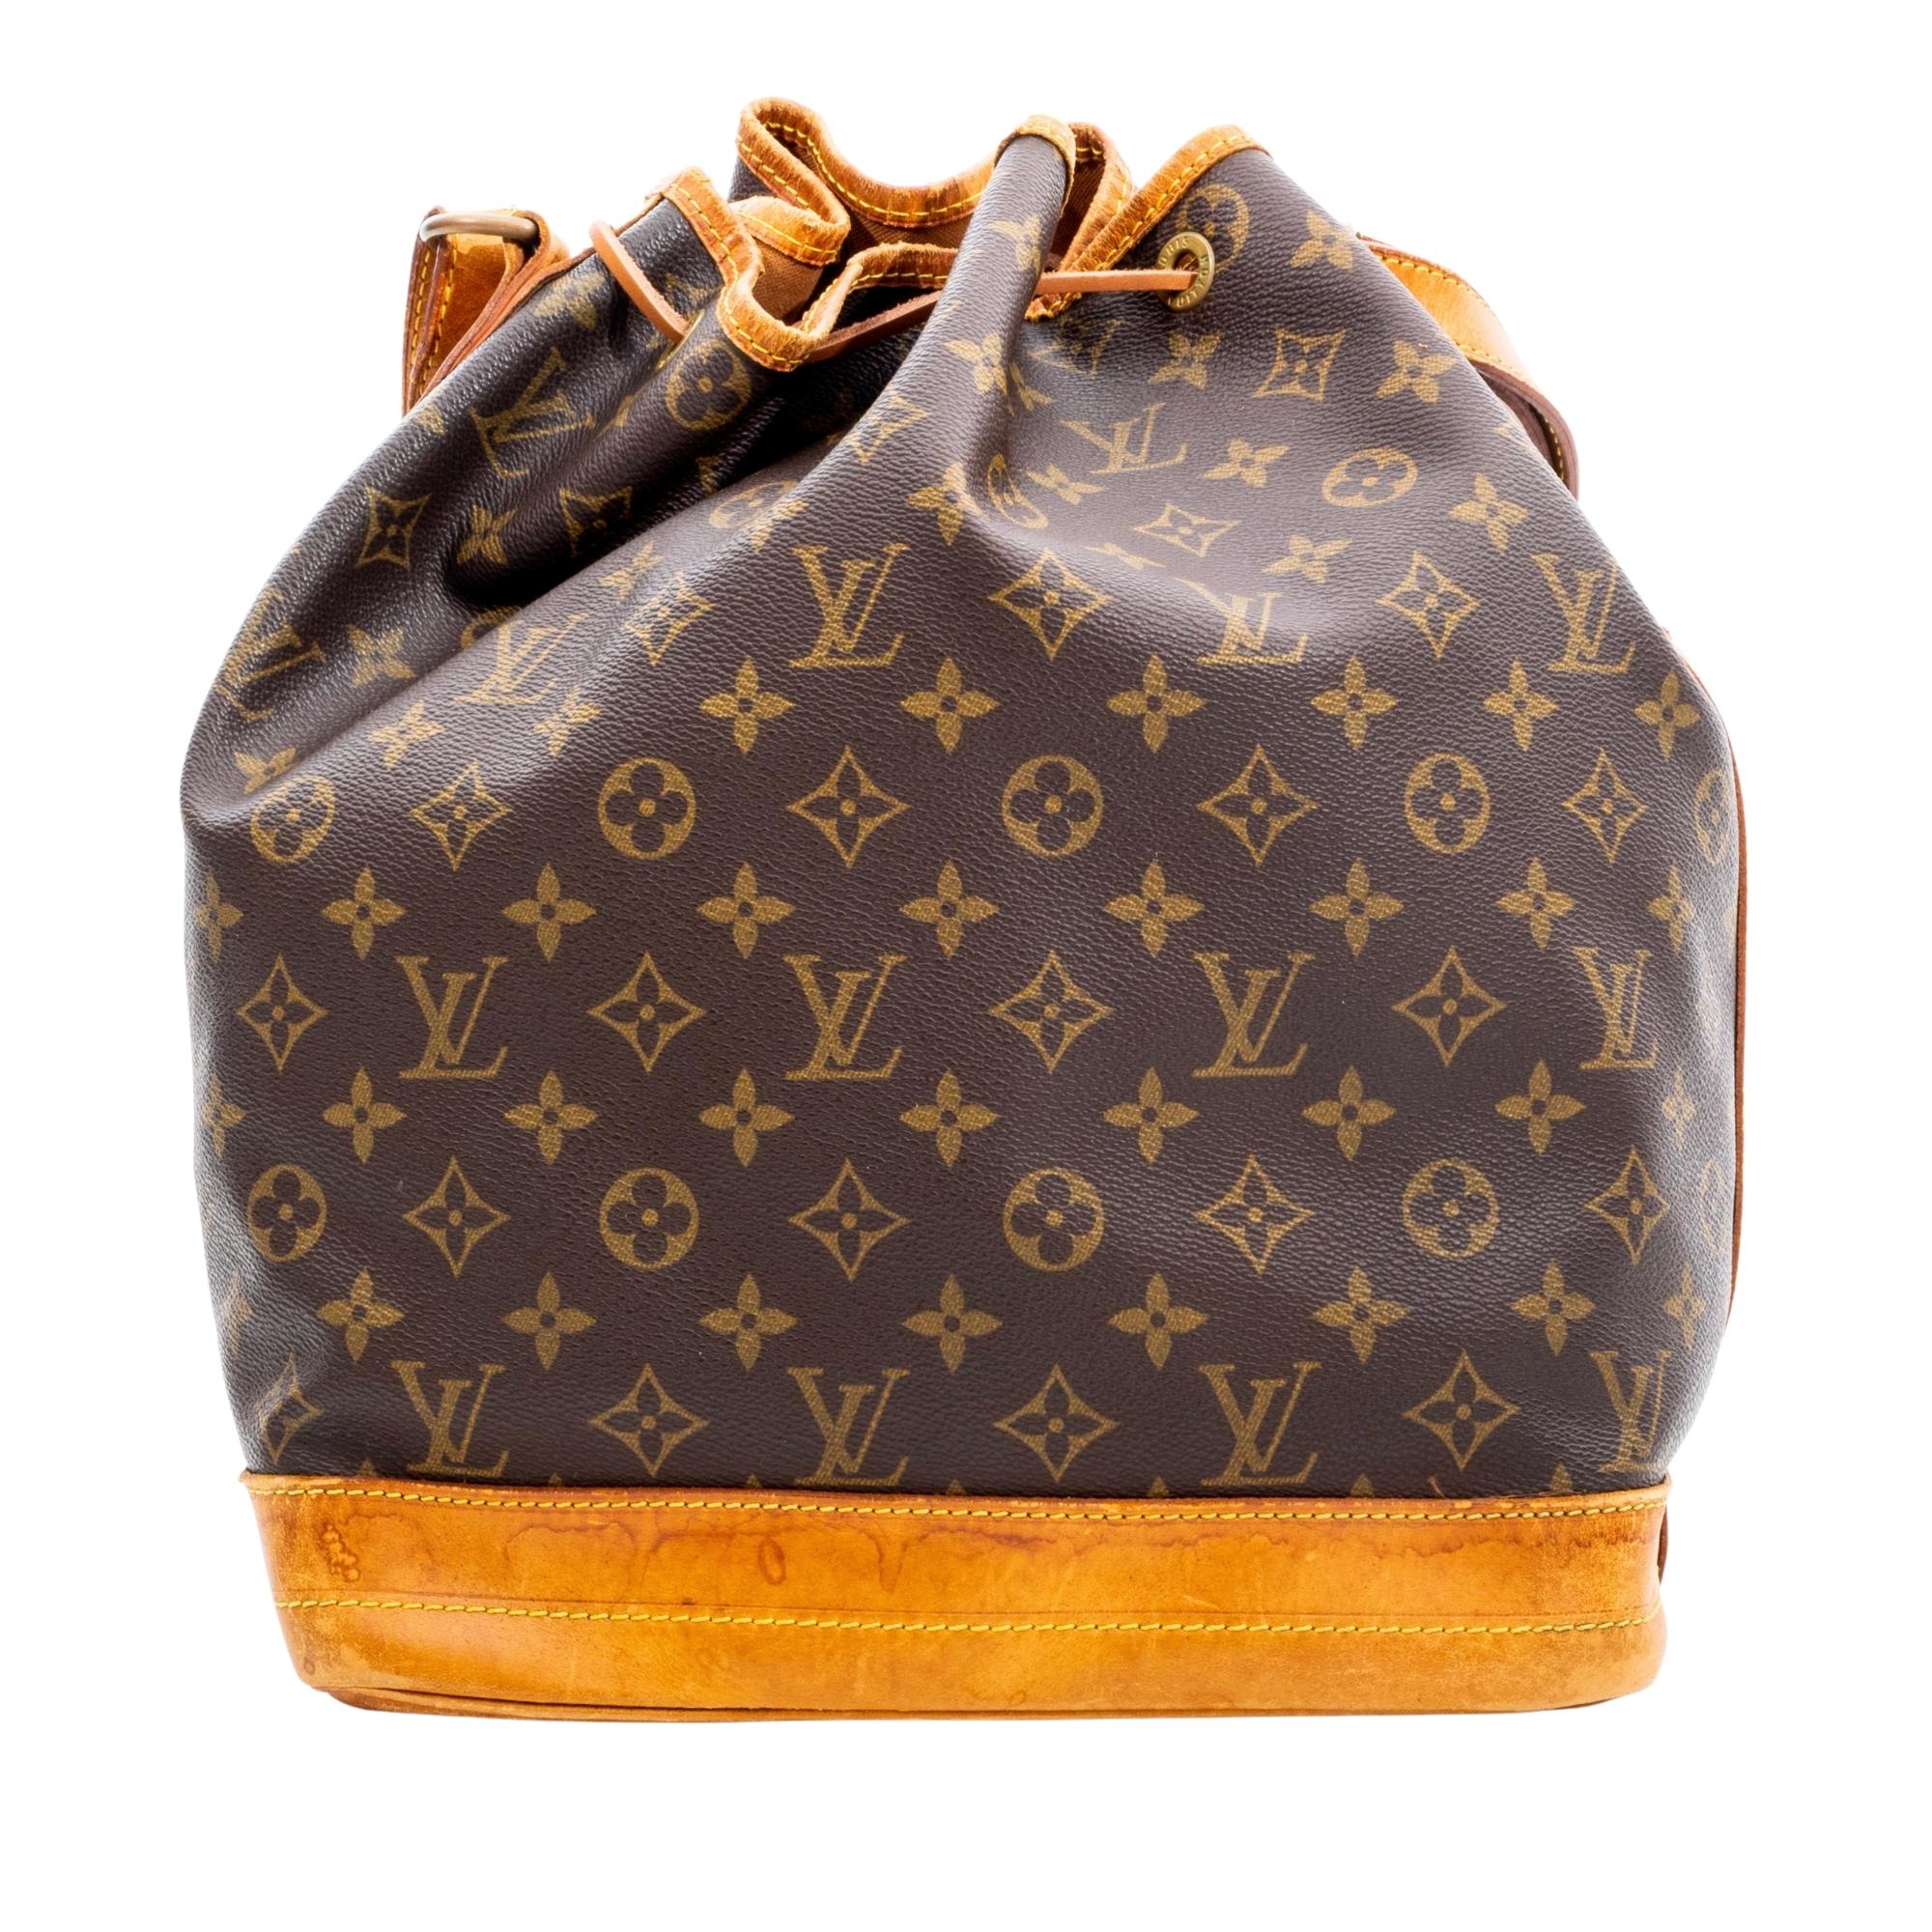 This bag is made with brown monogram coated canvas with vachetta leather trim, base and straps. The bag features an open top with drawstring closure that opens to brown woven fabric lining.

COLOR: Brown
MATERIAL: Coated canvas
ITEM CODE: